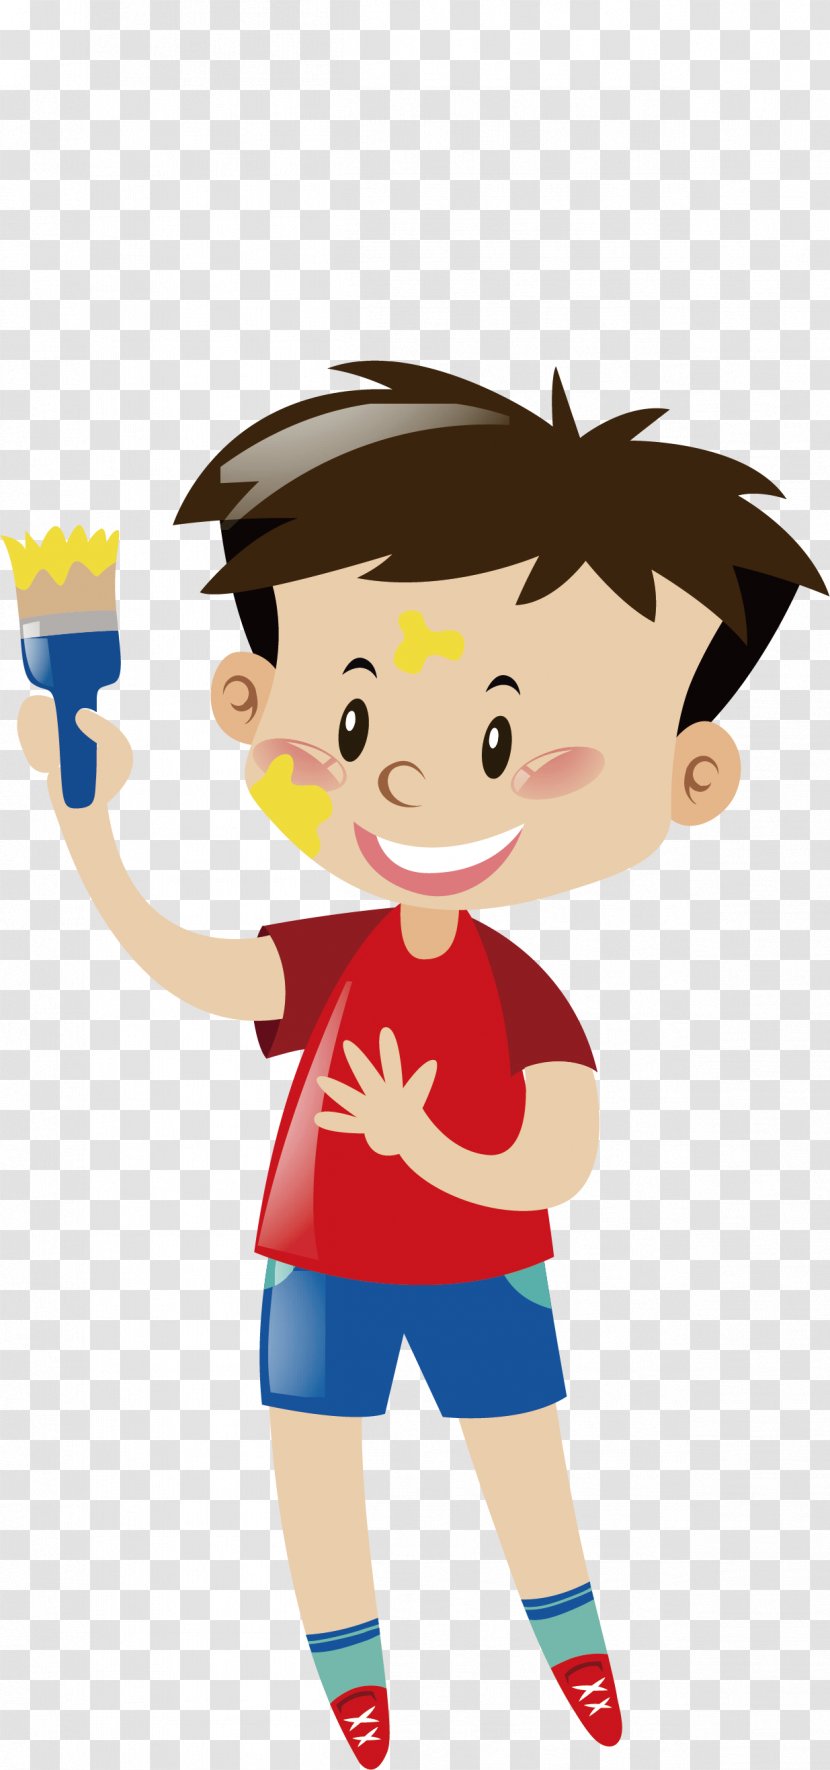 Painting Wall Illustration - Tree - Decoration Boy Transparent PNG